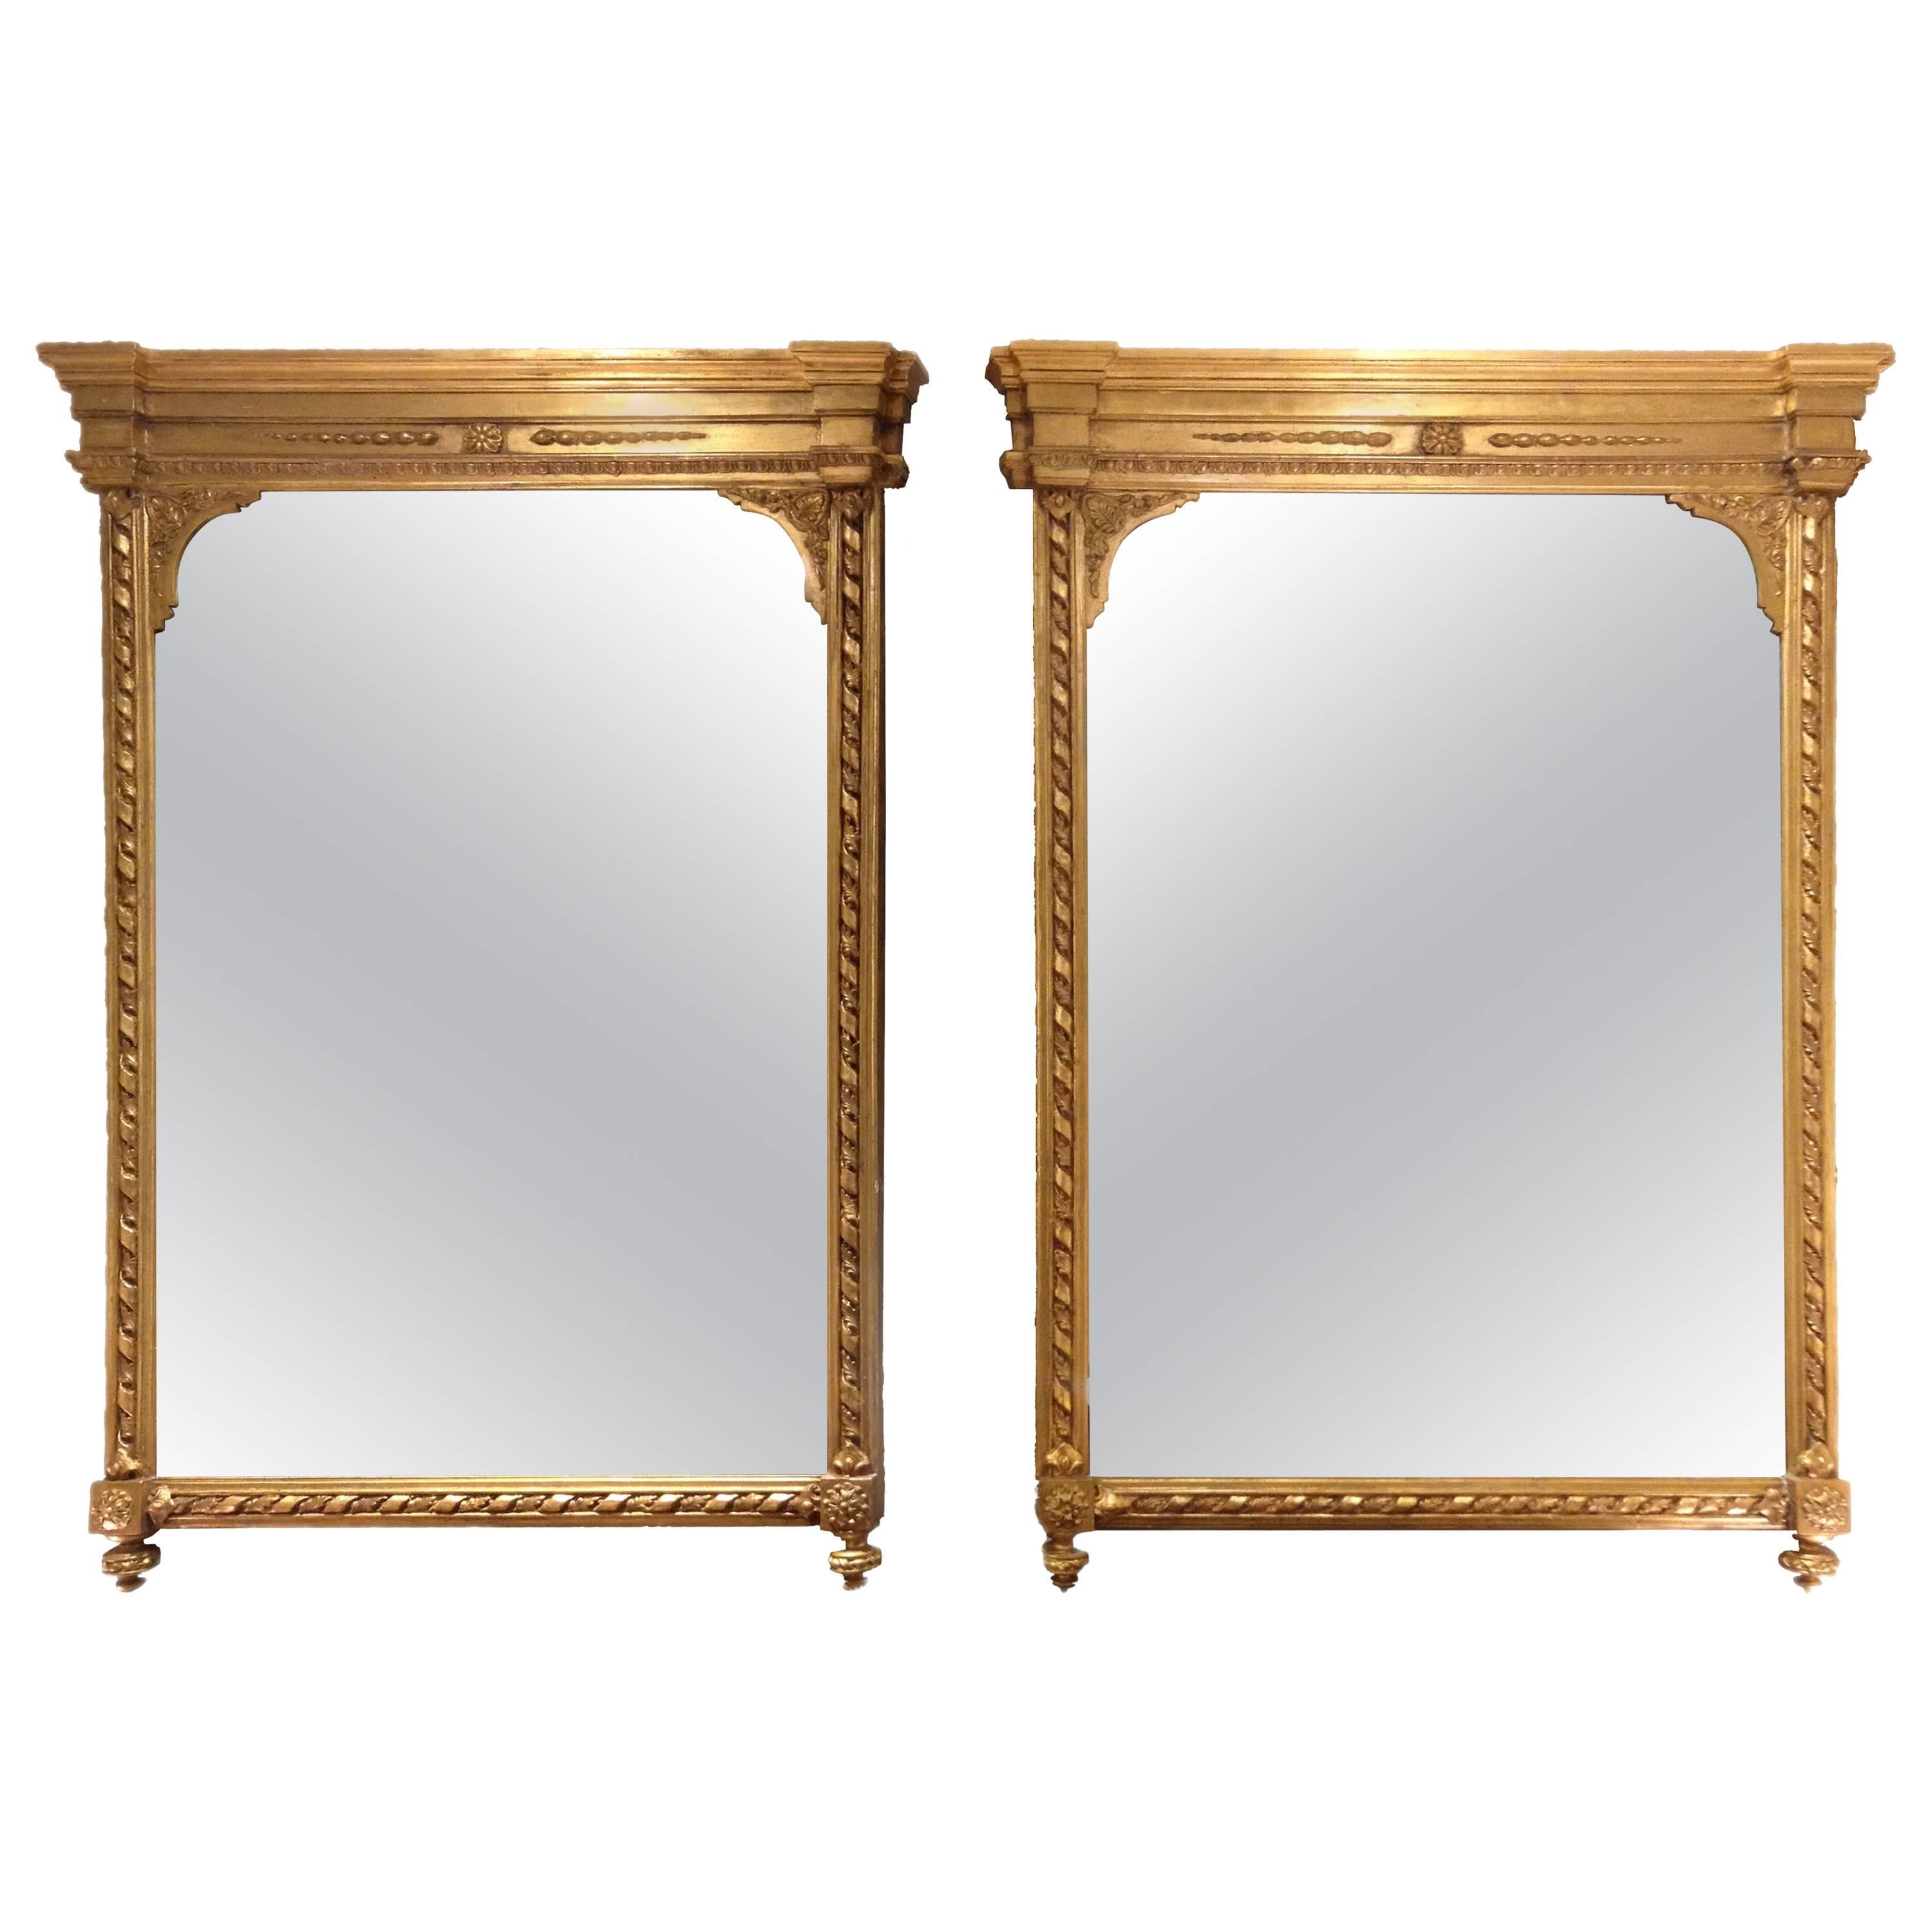 Pair of 19th Century Giltwood and Gesso Mirrors